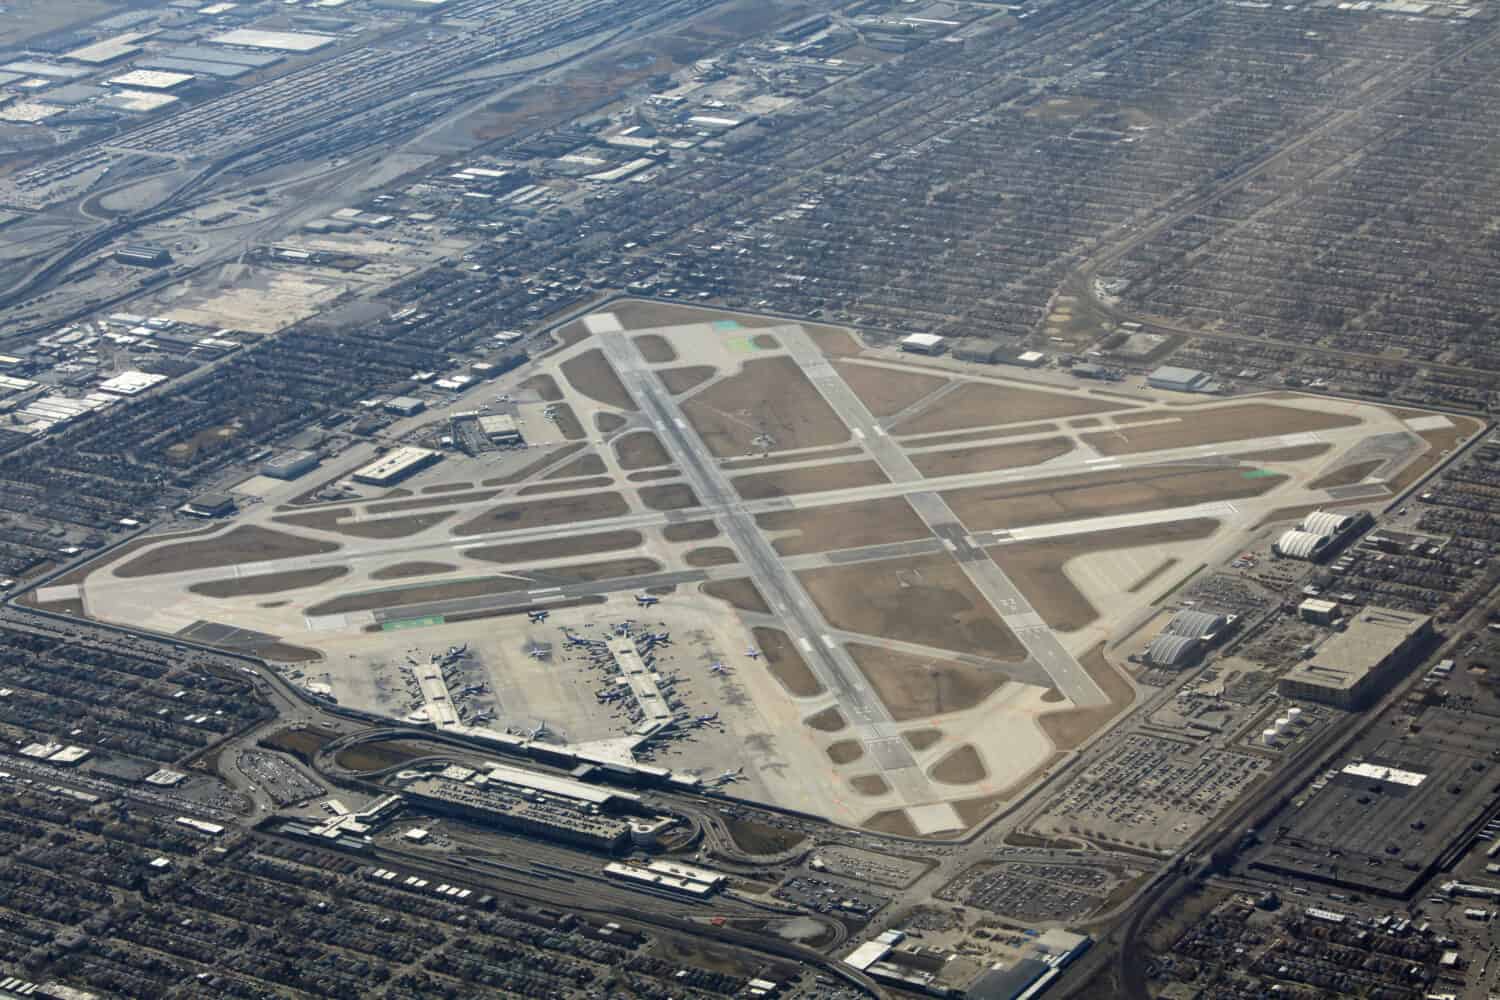 Aerial view of Midway airport in Chicago